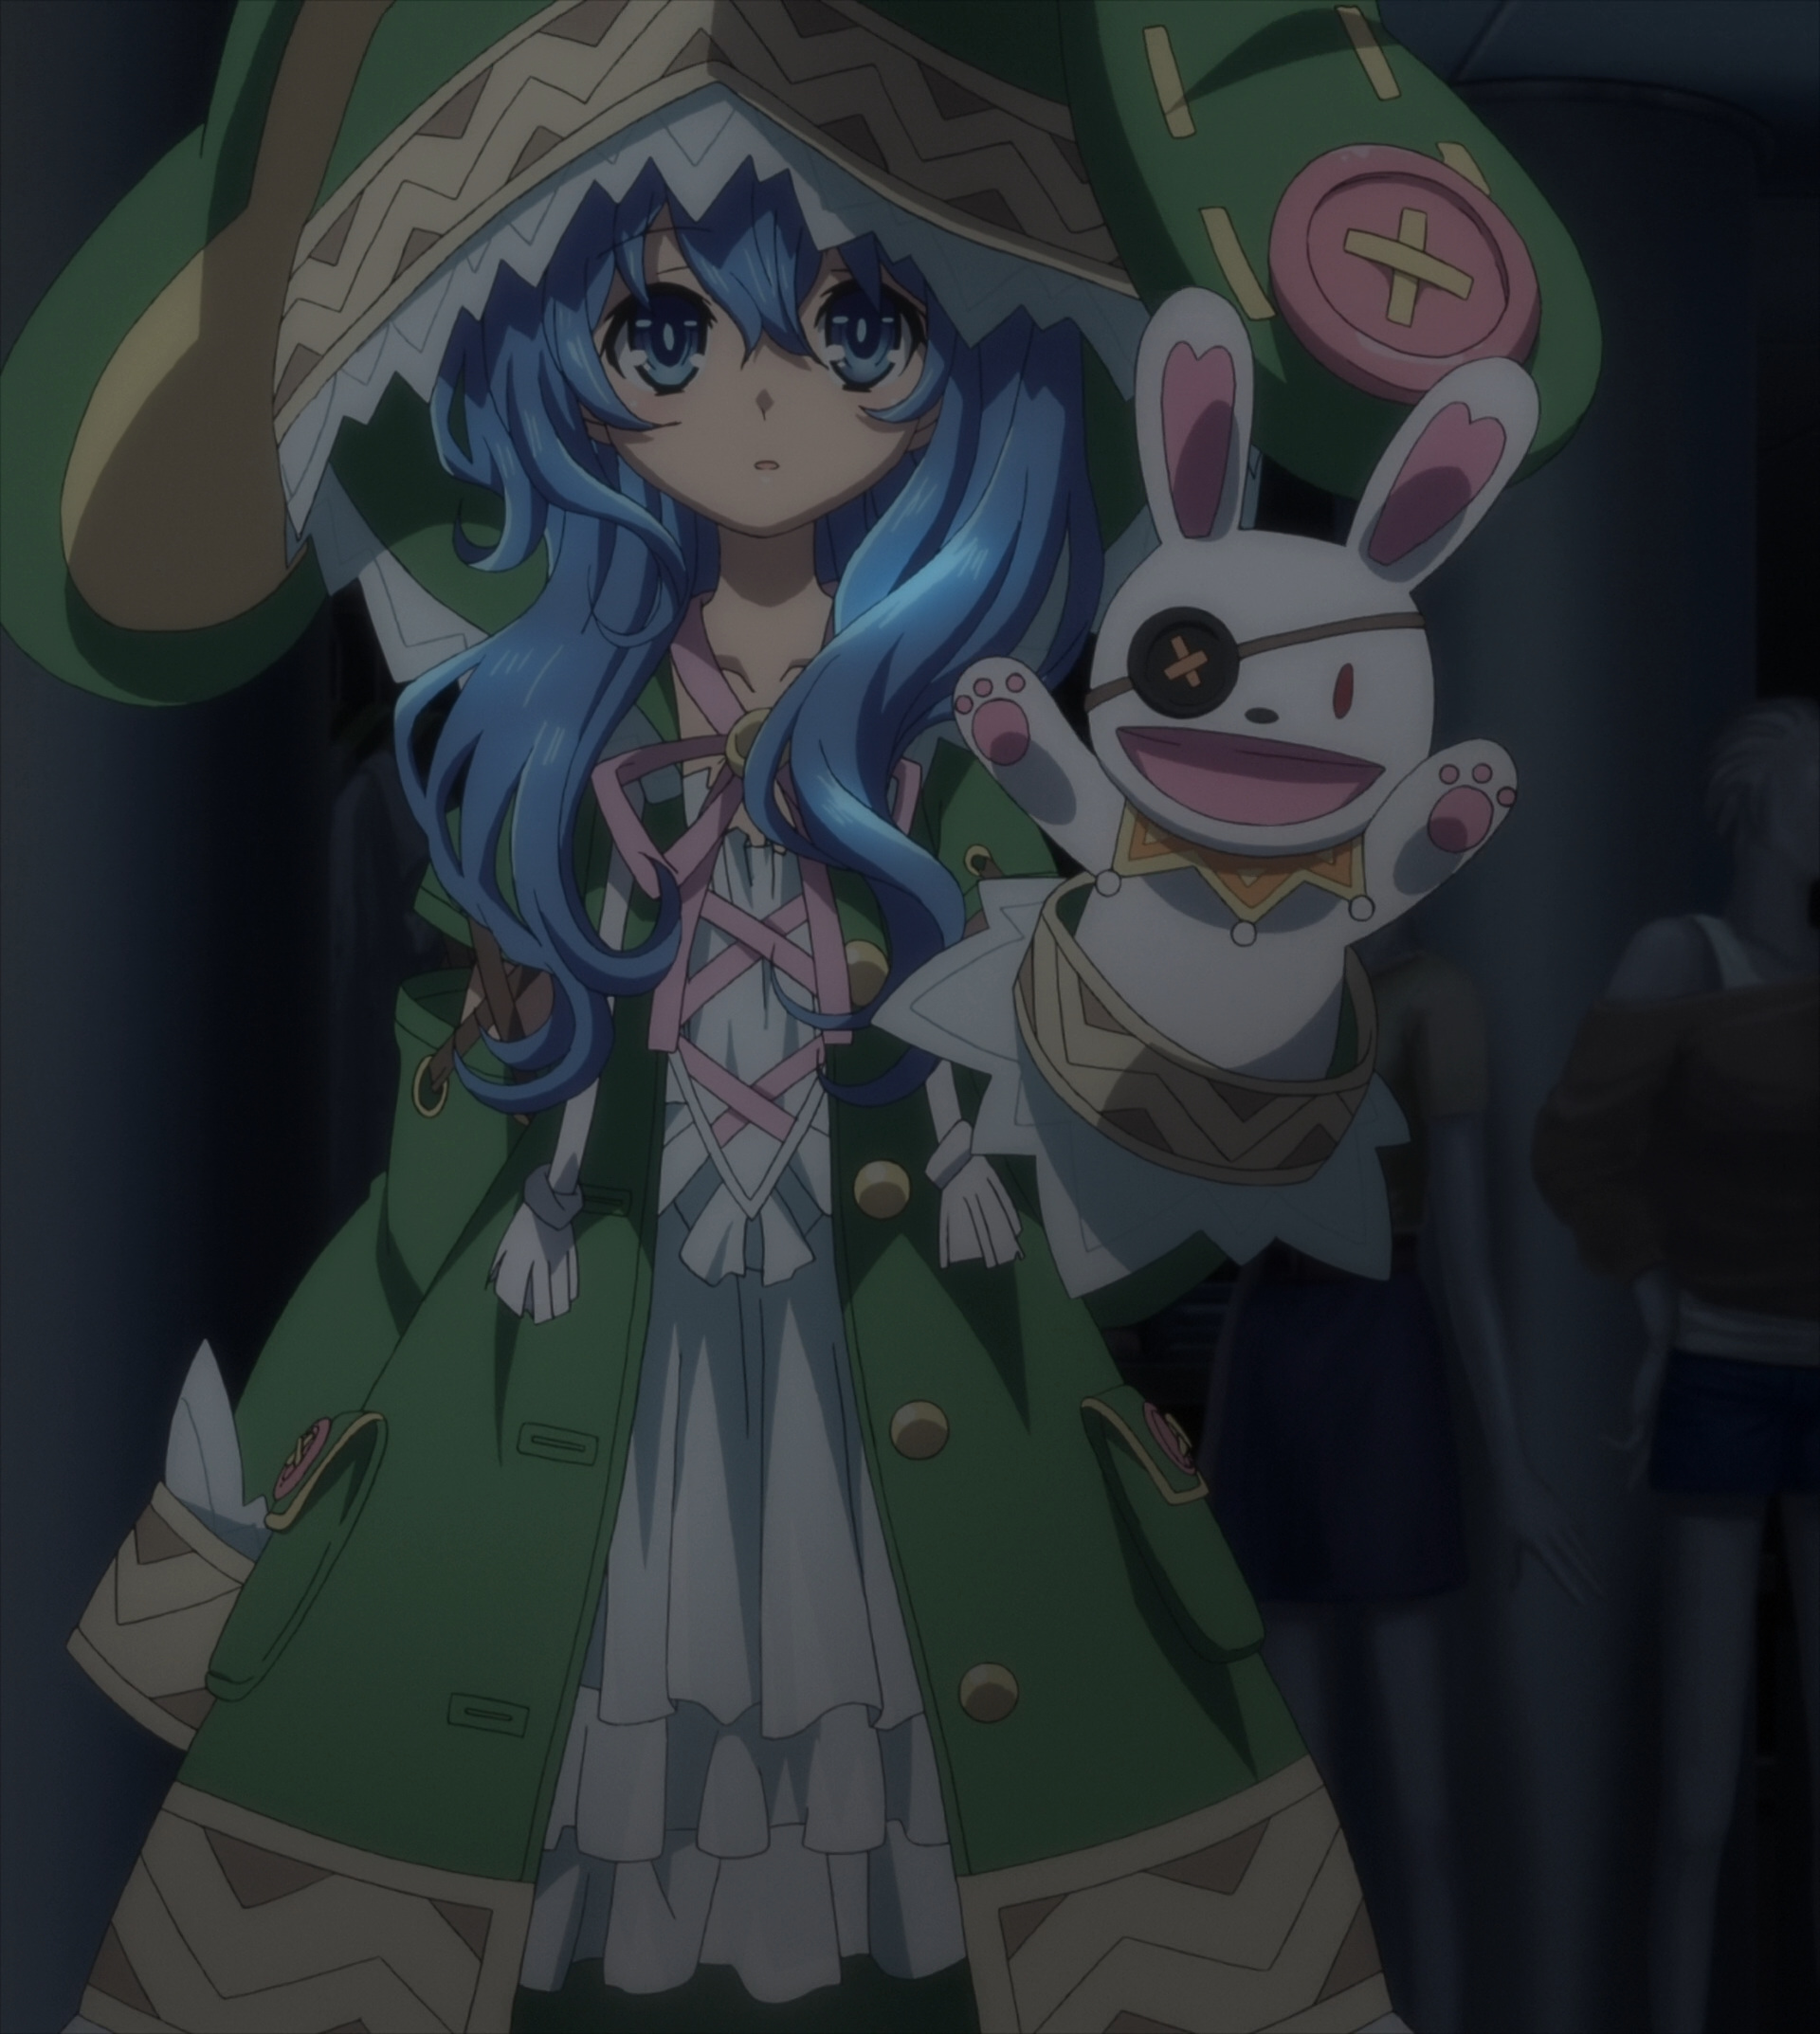 Let’s get to know Yoshino a bit more before heading down. 